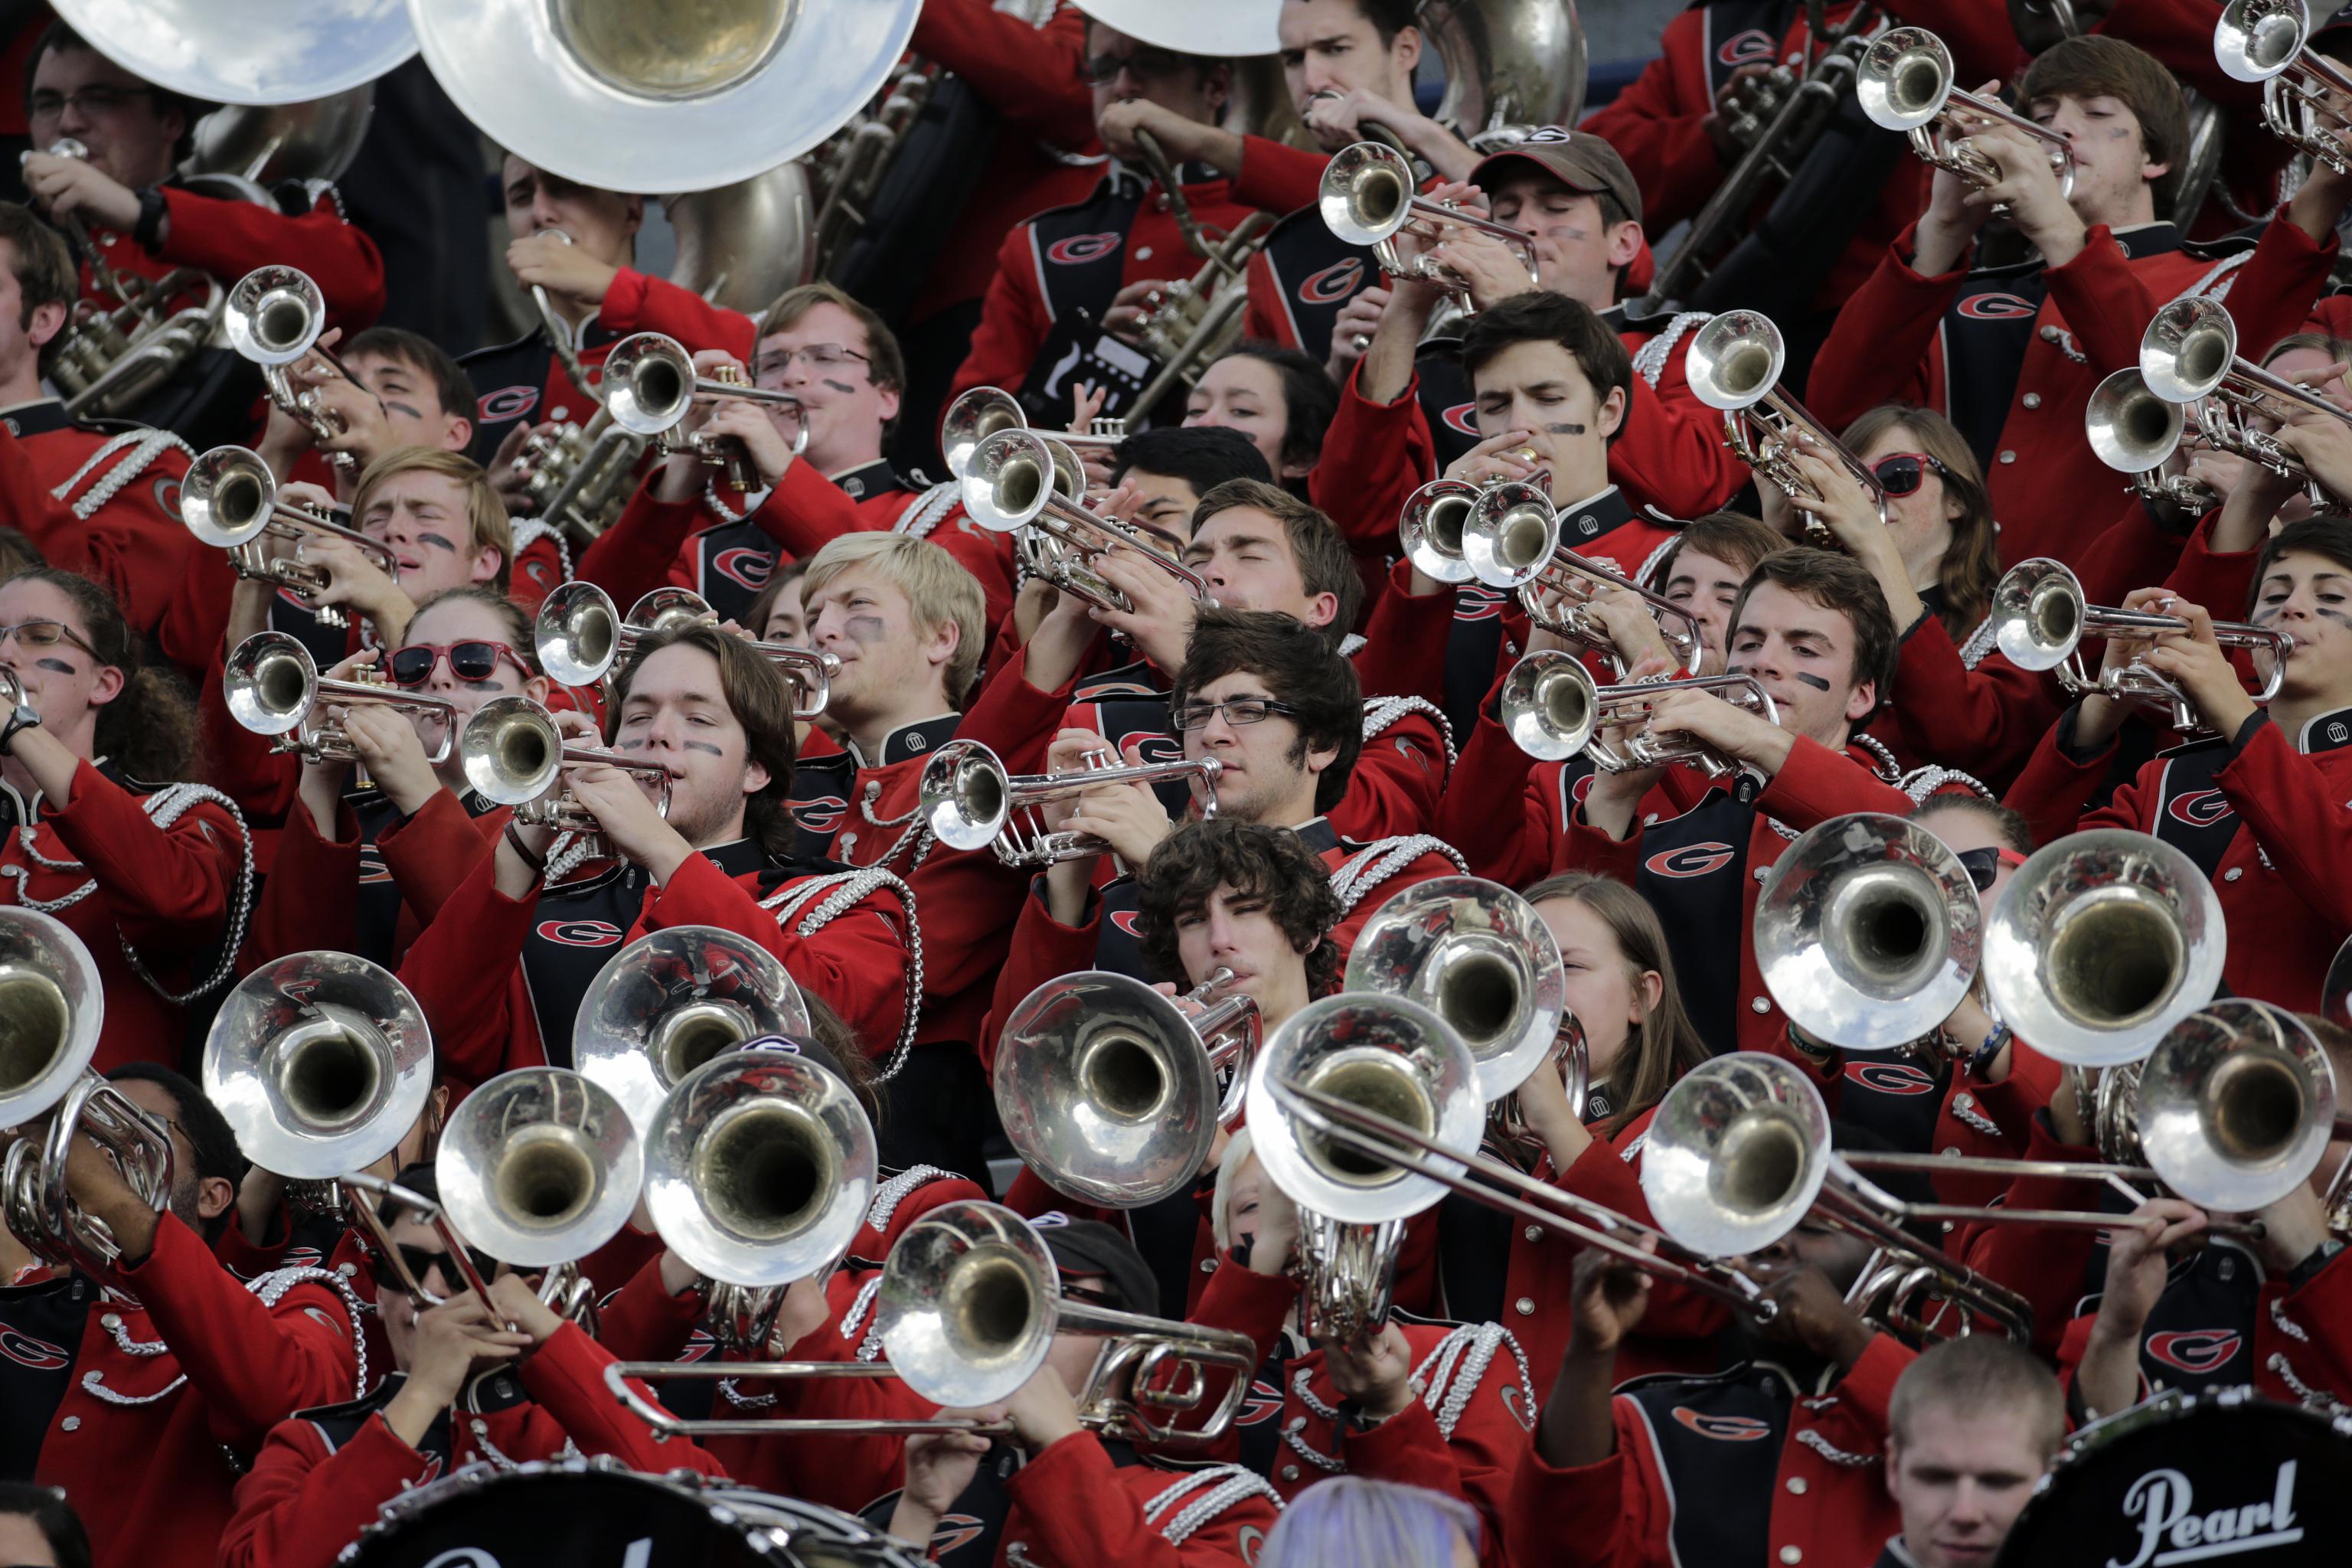 Marching Band Replaces 'Gone with the Wind' Song as Signature